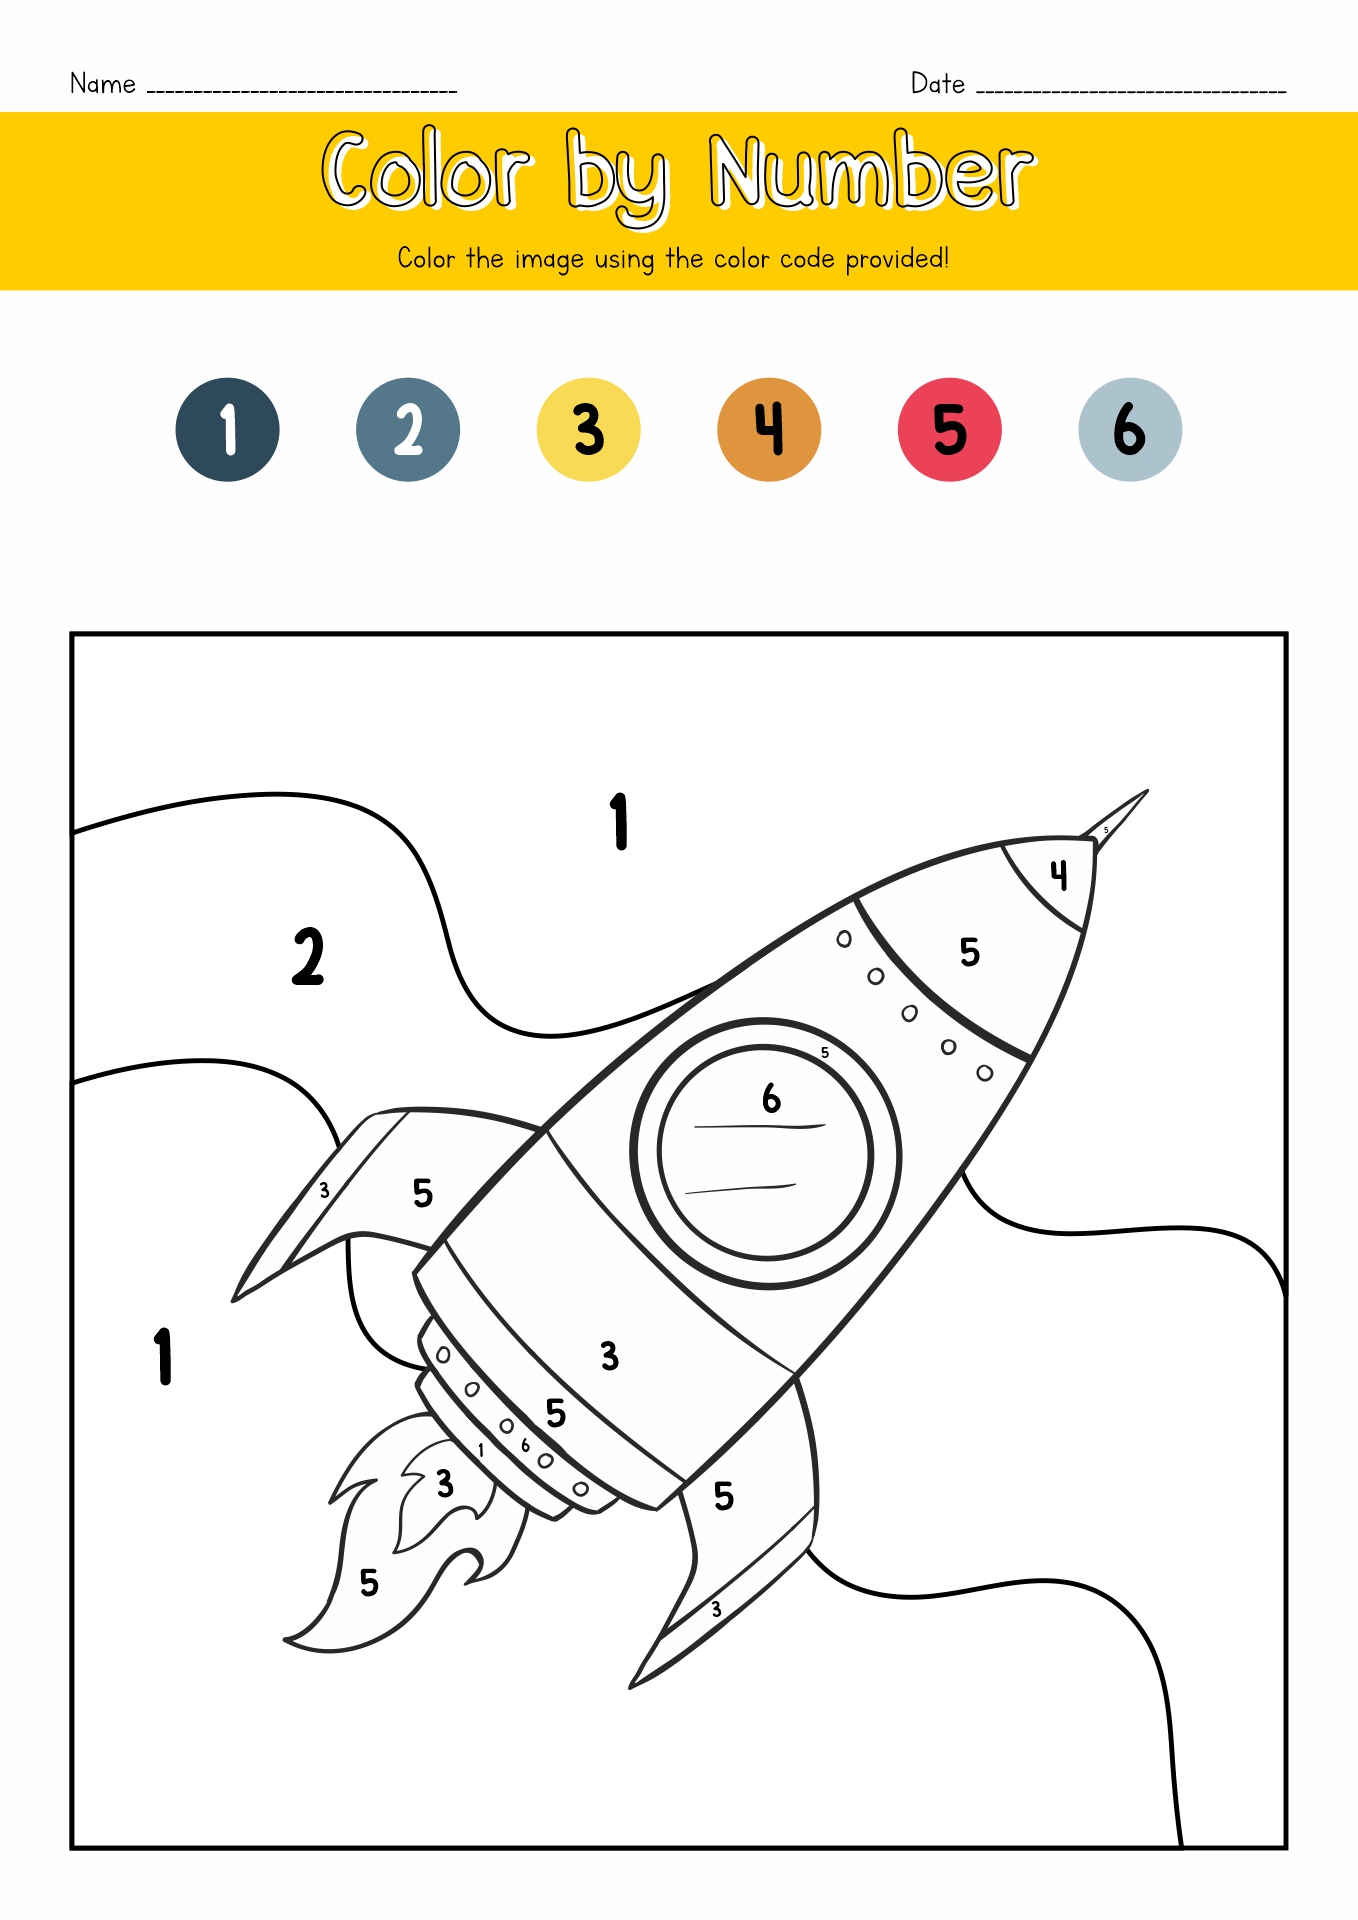 Space Color by Number Coloring Pages